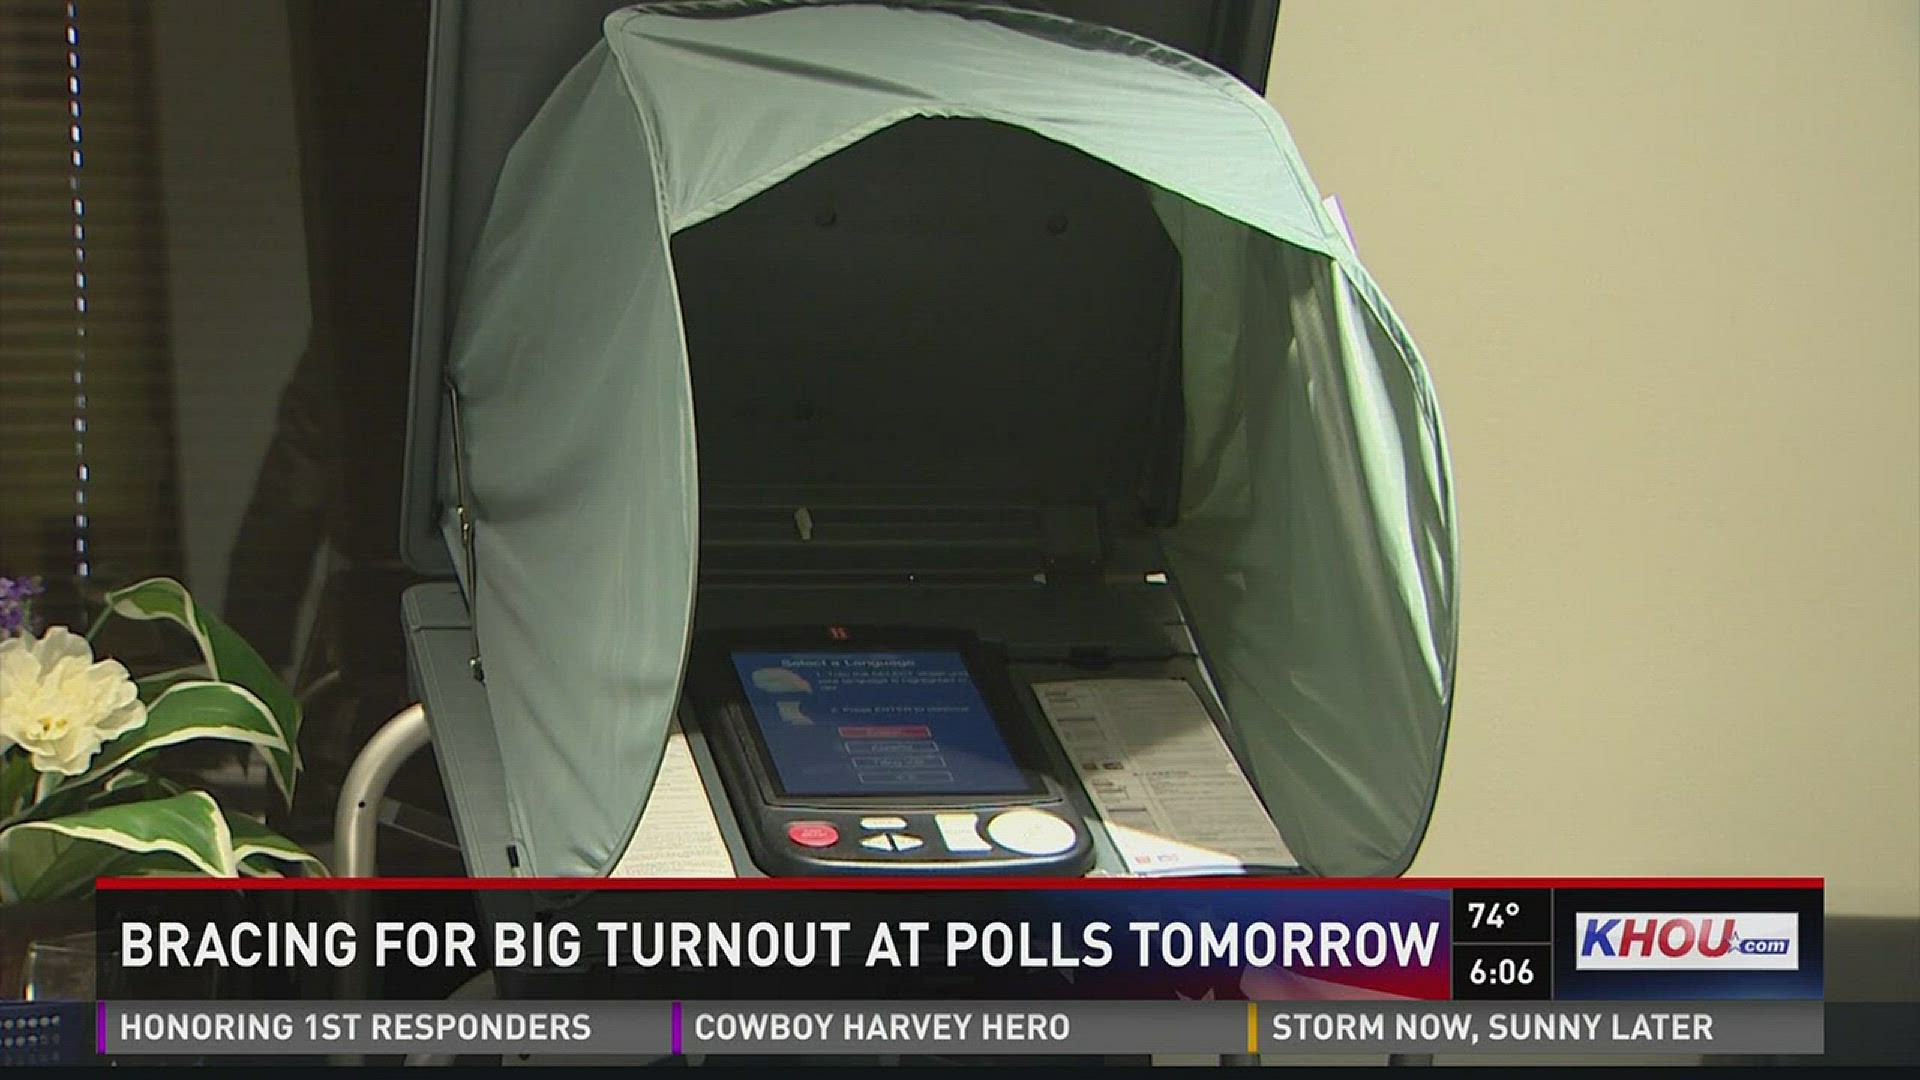 Election officials are preparing for large voter turnout in Texas' primary.